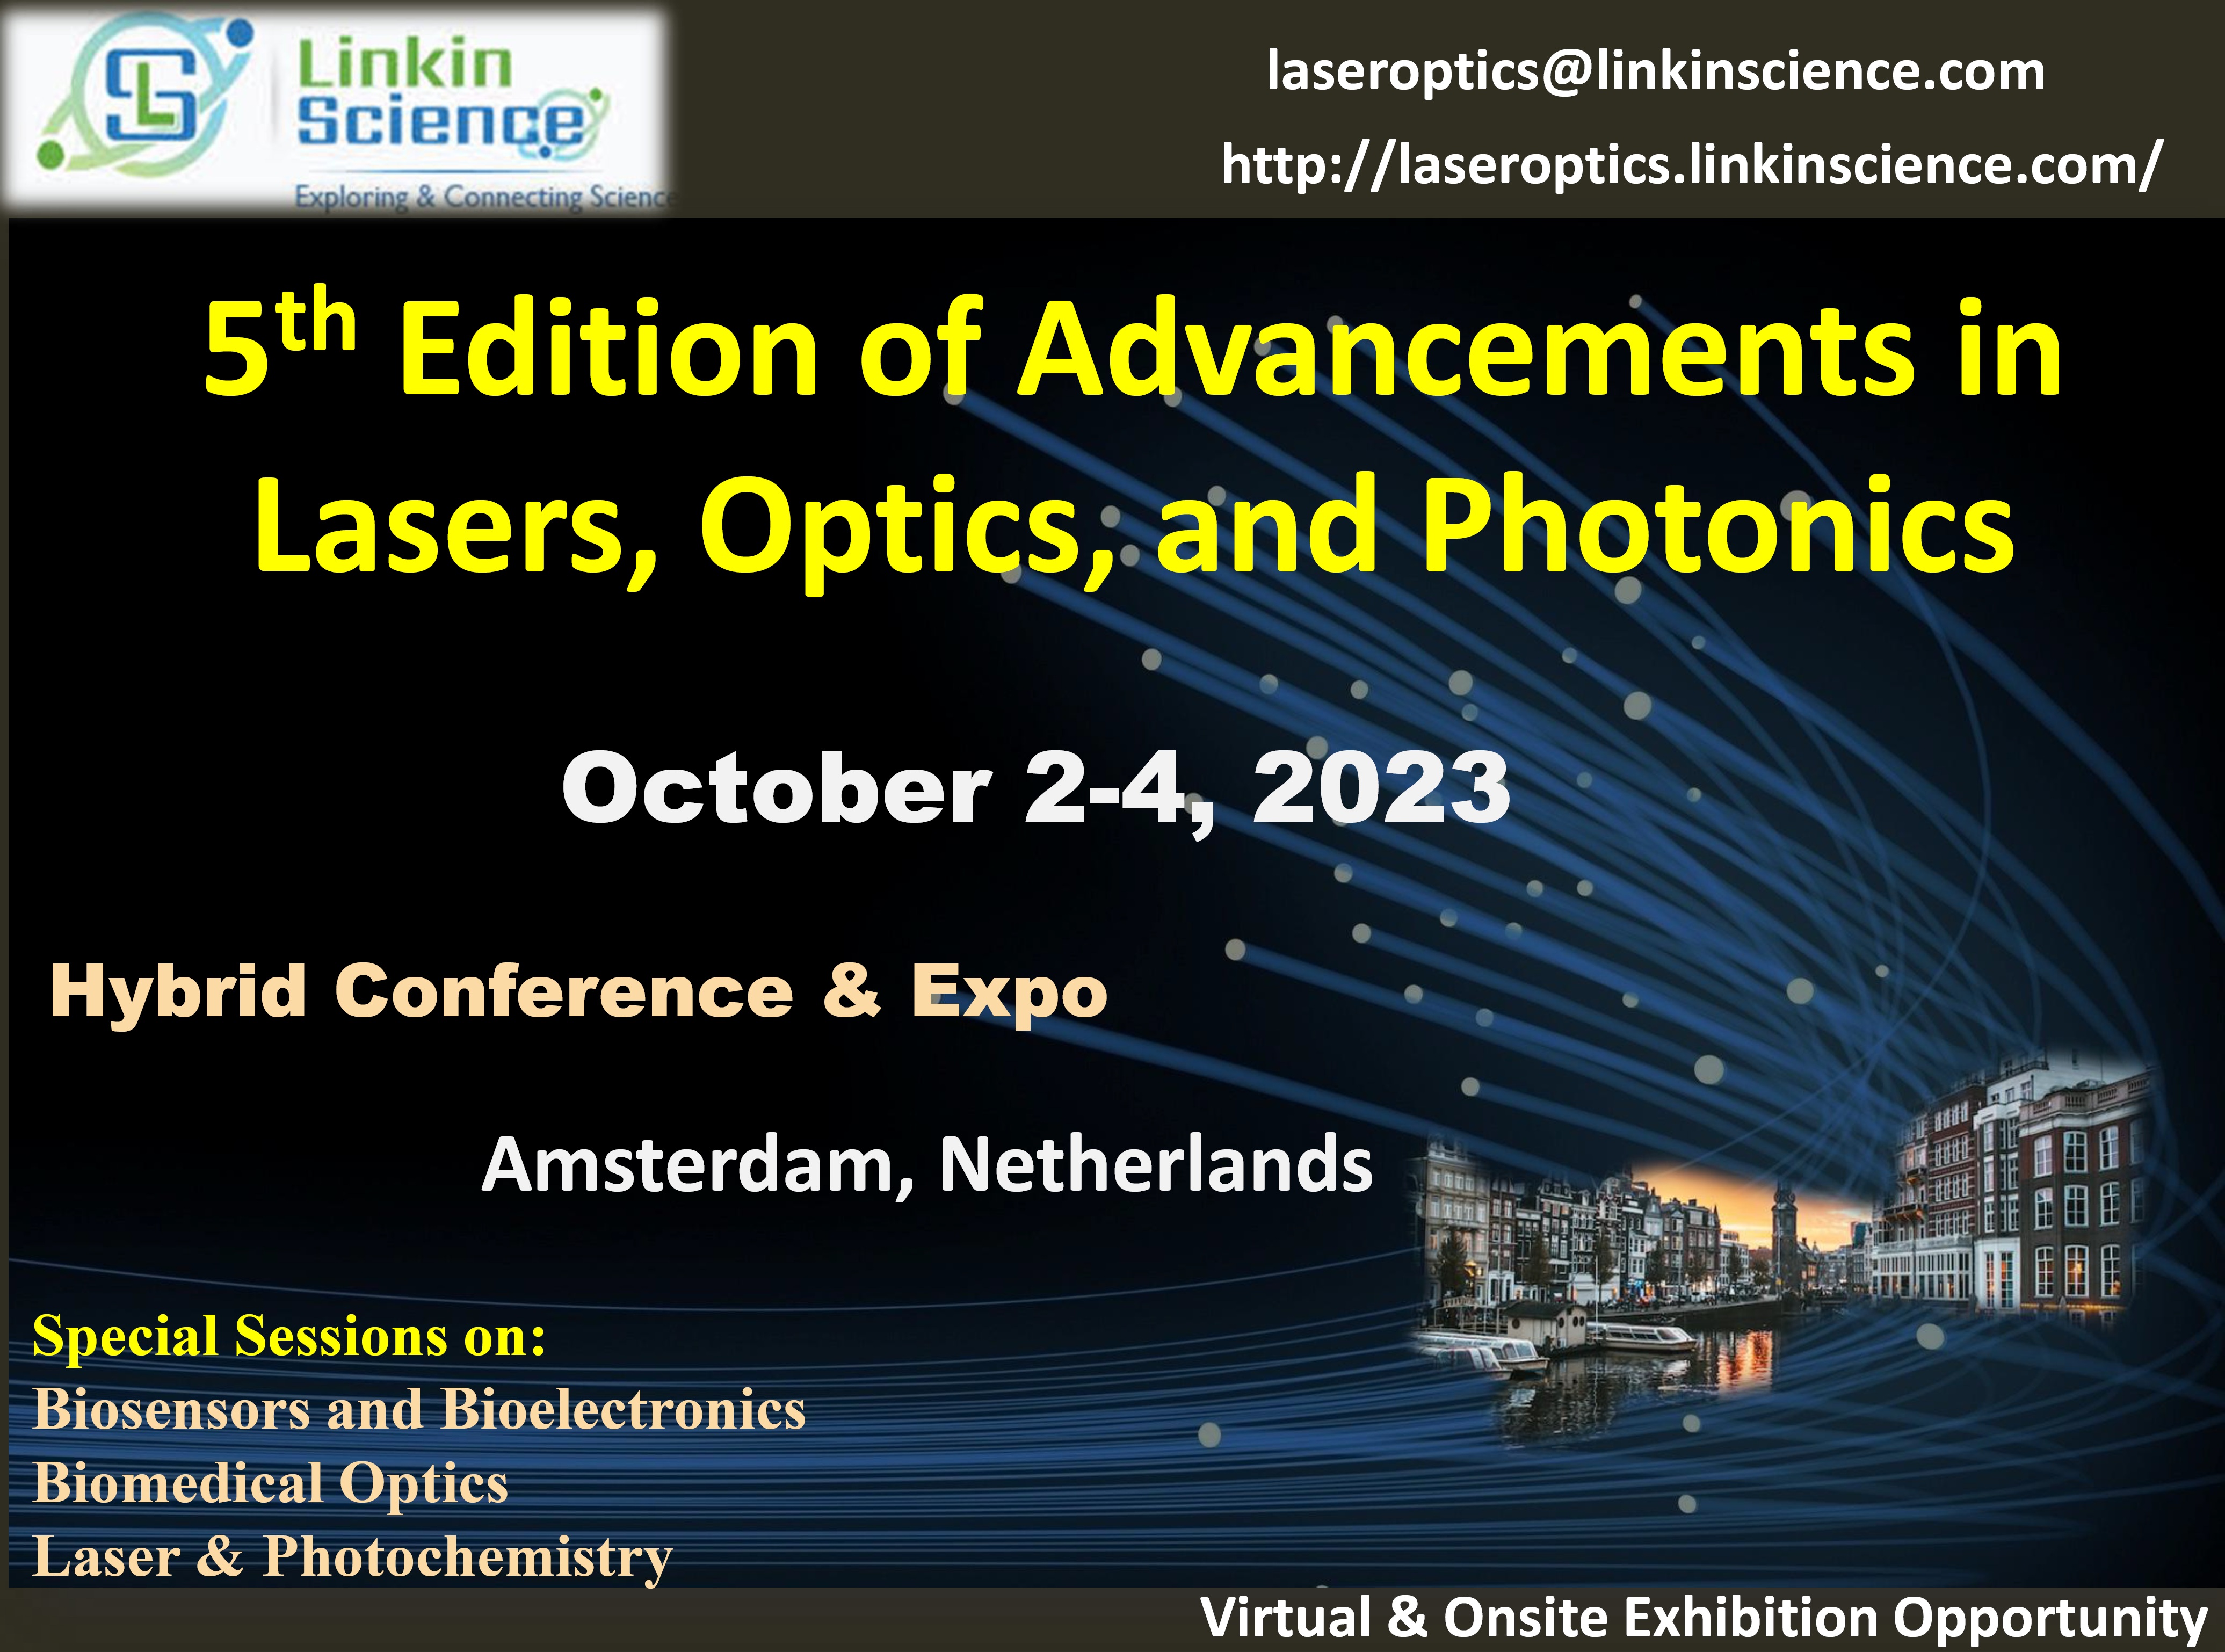 5th Edition of Advancements in Lasers, Optics, and Photonics Hybrid conference & Expo,, Online Event